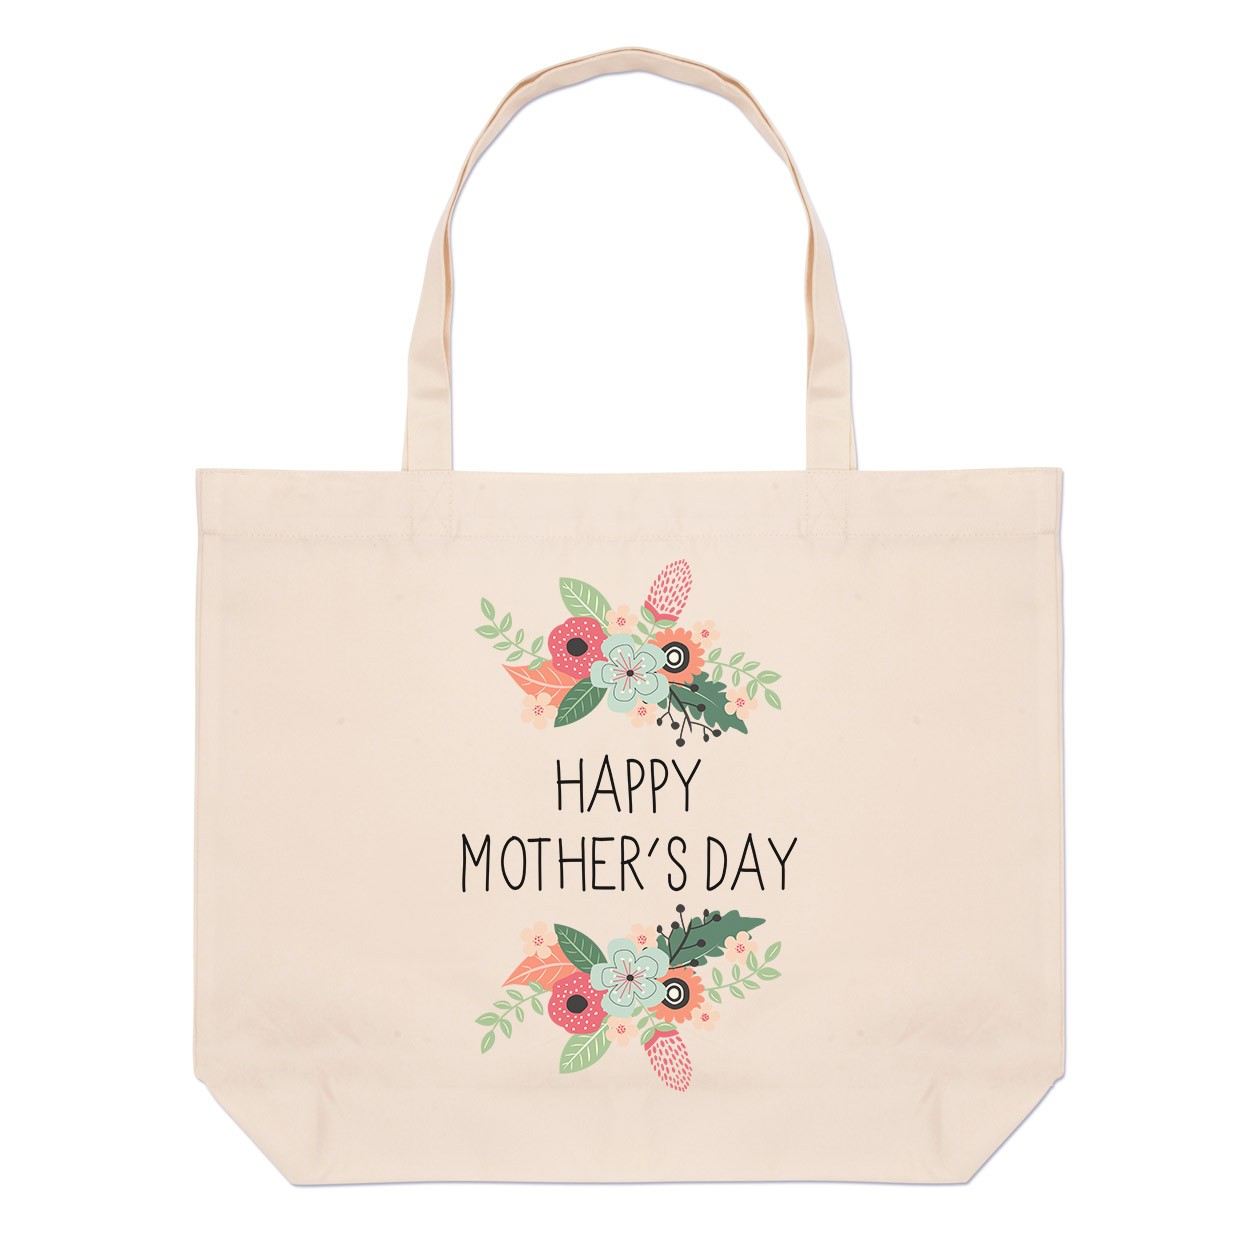 Happy Mother's Day Flowers Large Beach Tote Bag